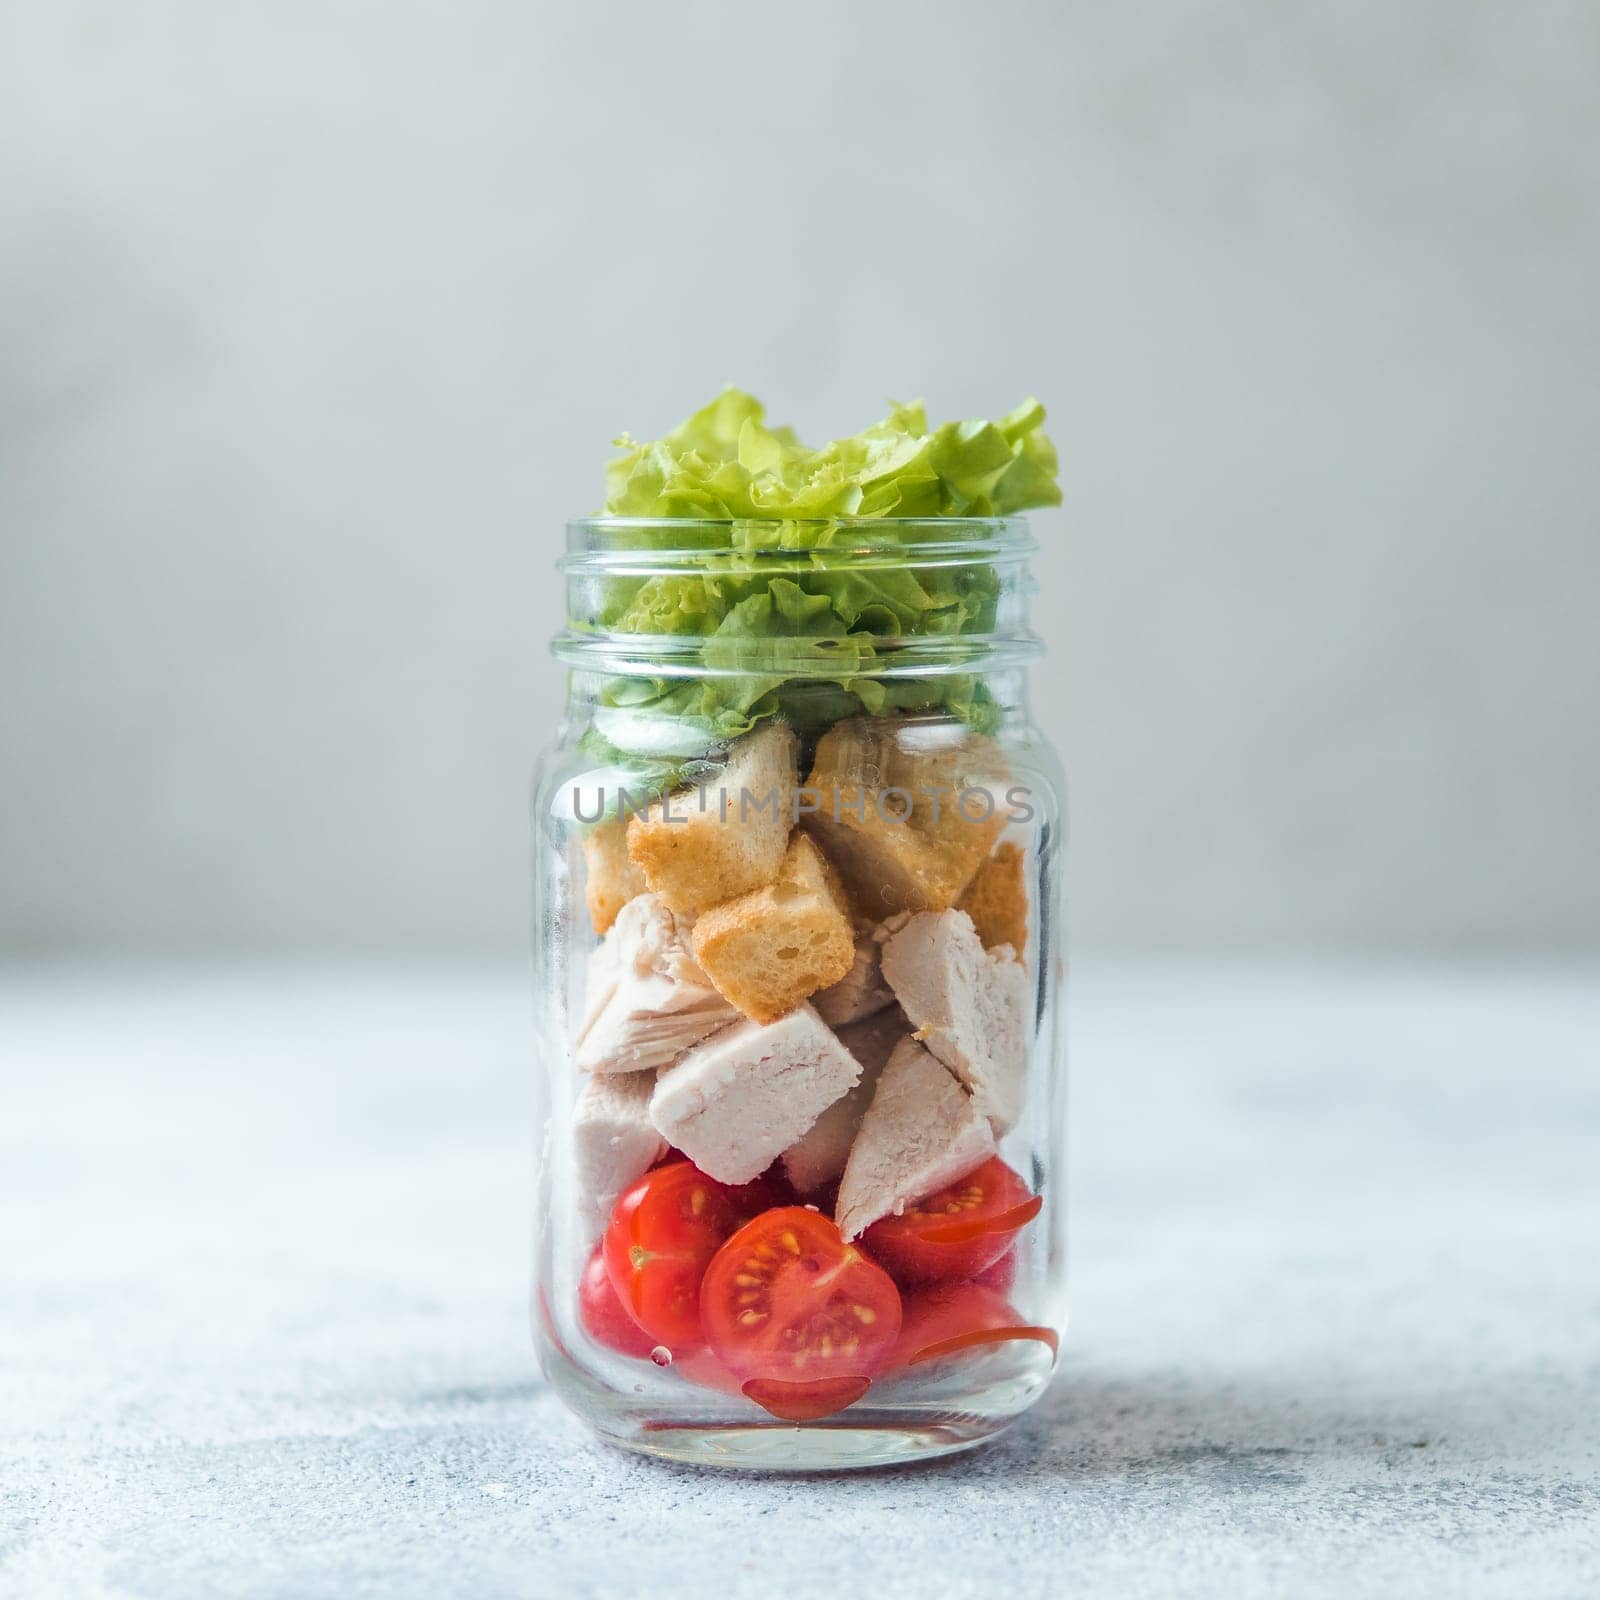 Caesar salad in glass mason jar on gray background. Copy space for text. Homemade healthy caesar salad layered in jar. Healthy food, trendy modern food, diet concept, idea, recipe.